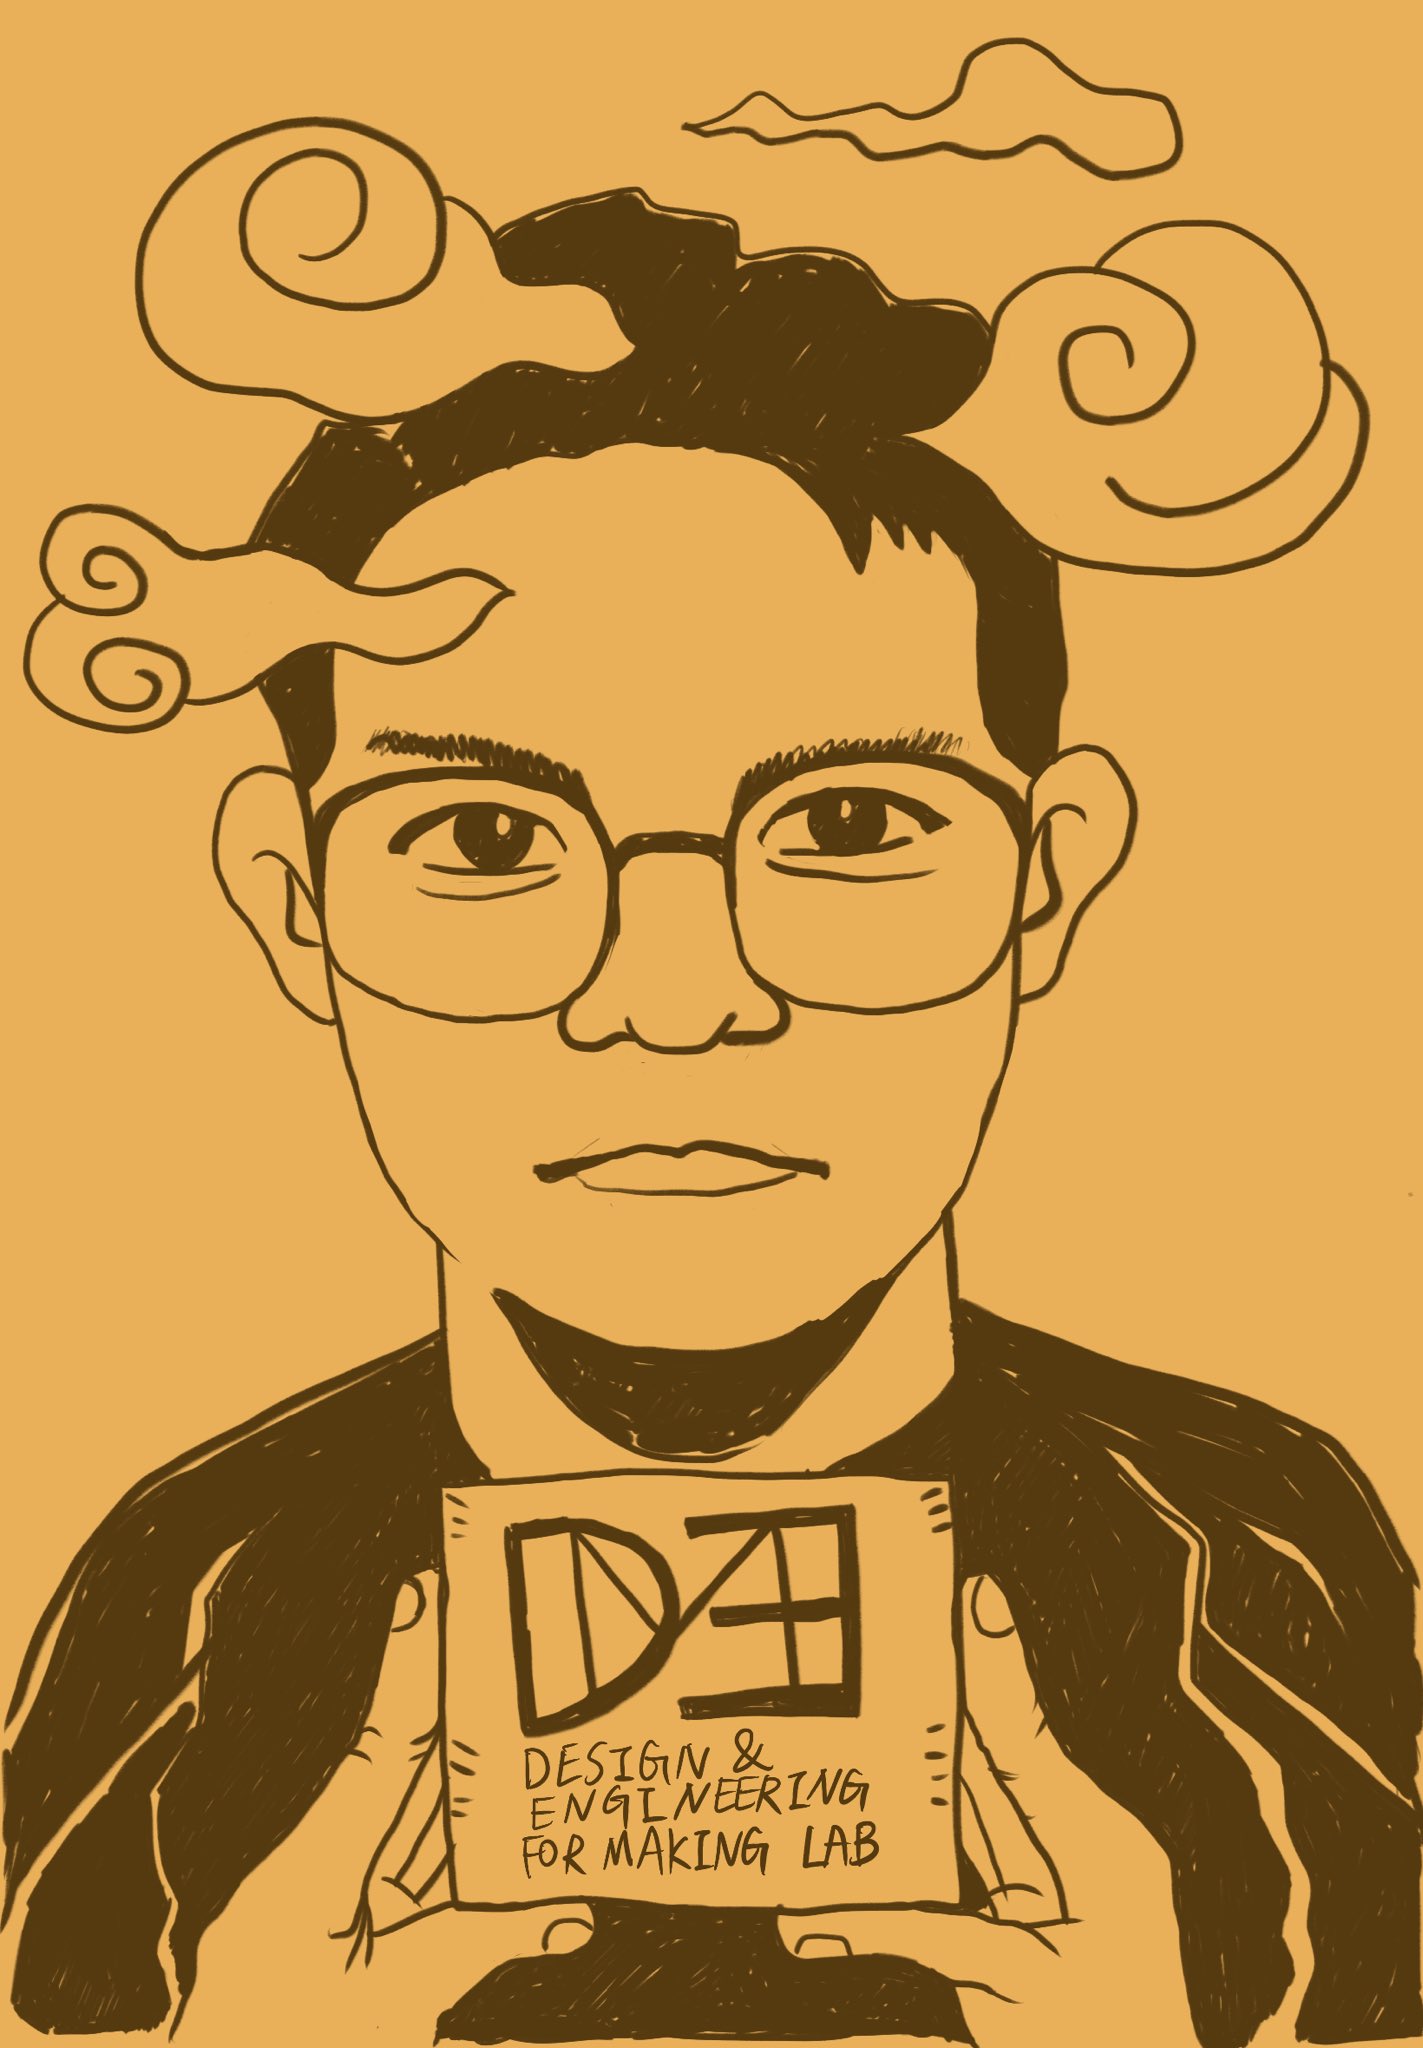 A sketch of Liang holding a sign that has the De4m Lab log